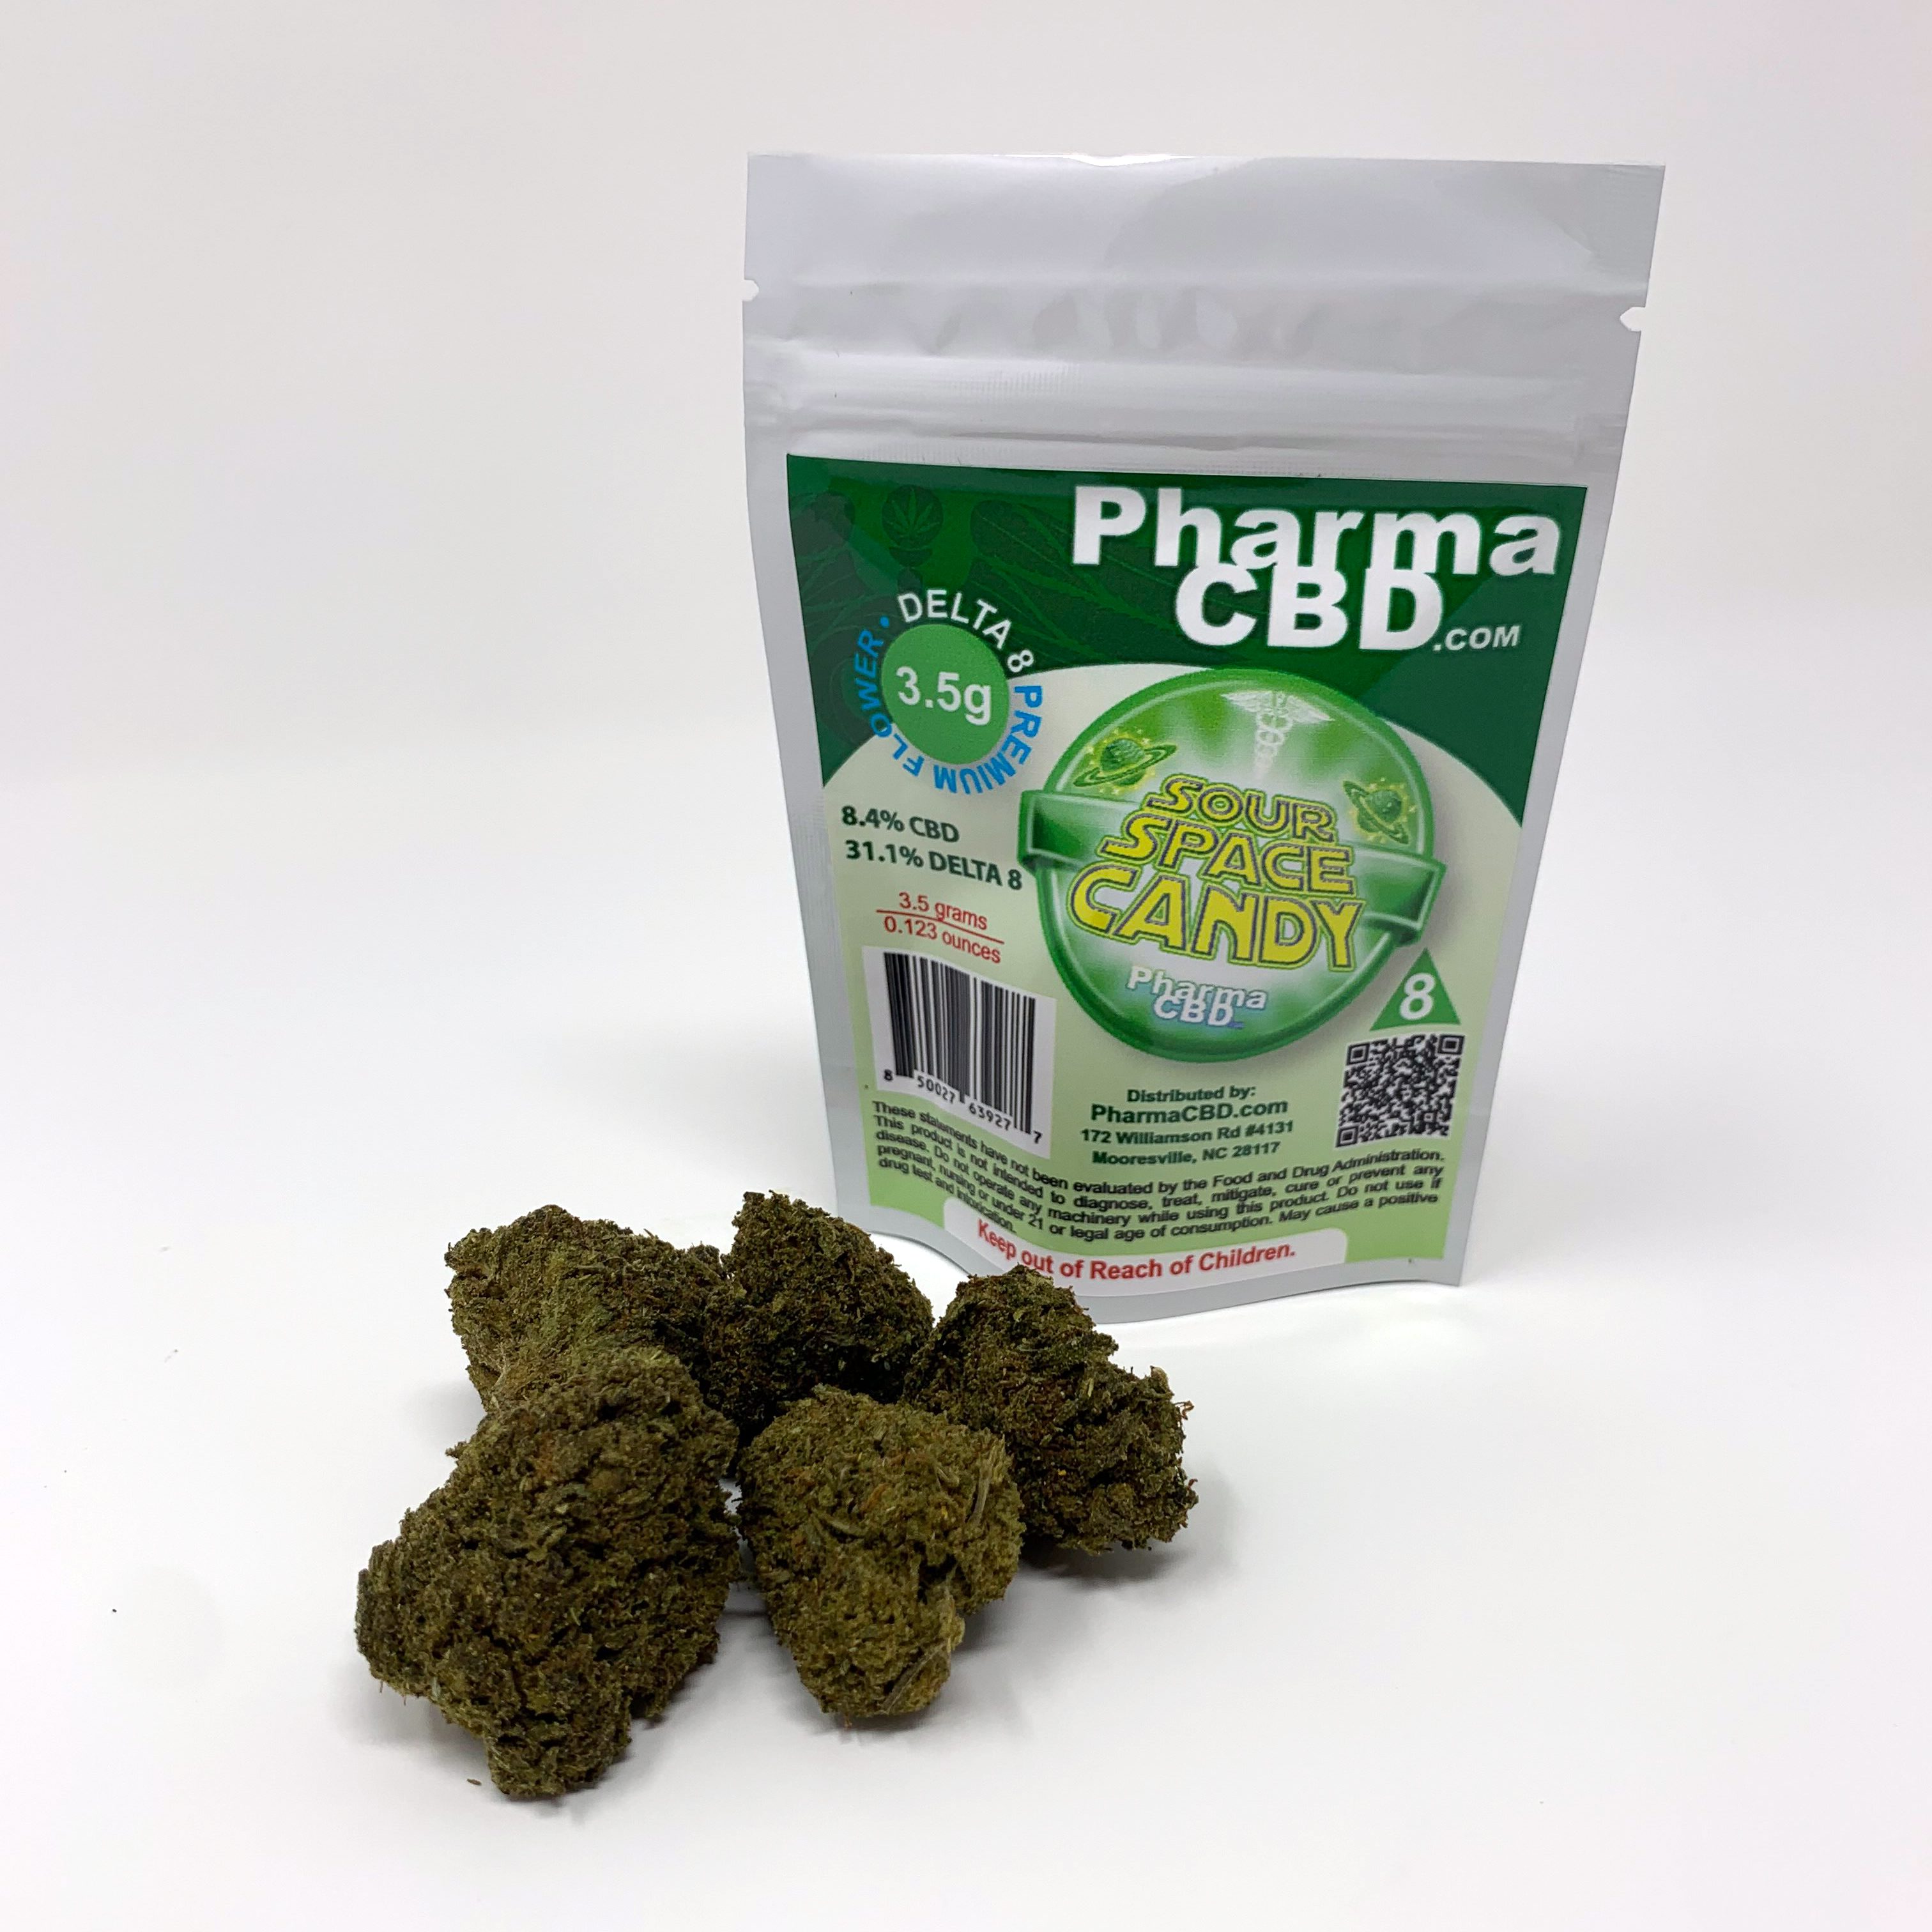 PharmaCBD Delta-8-THC Infused Hemp Flower - Sour Space Candy